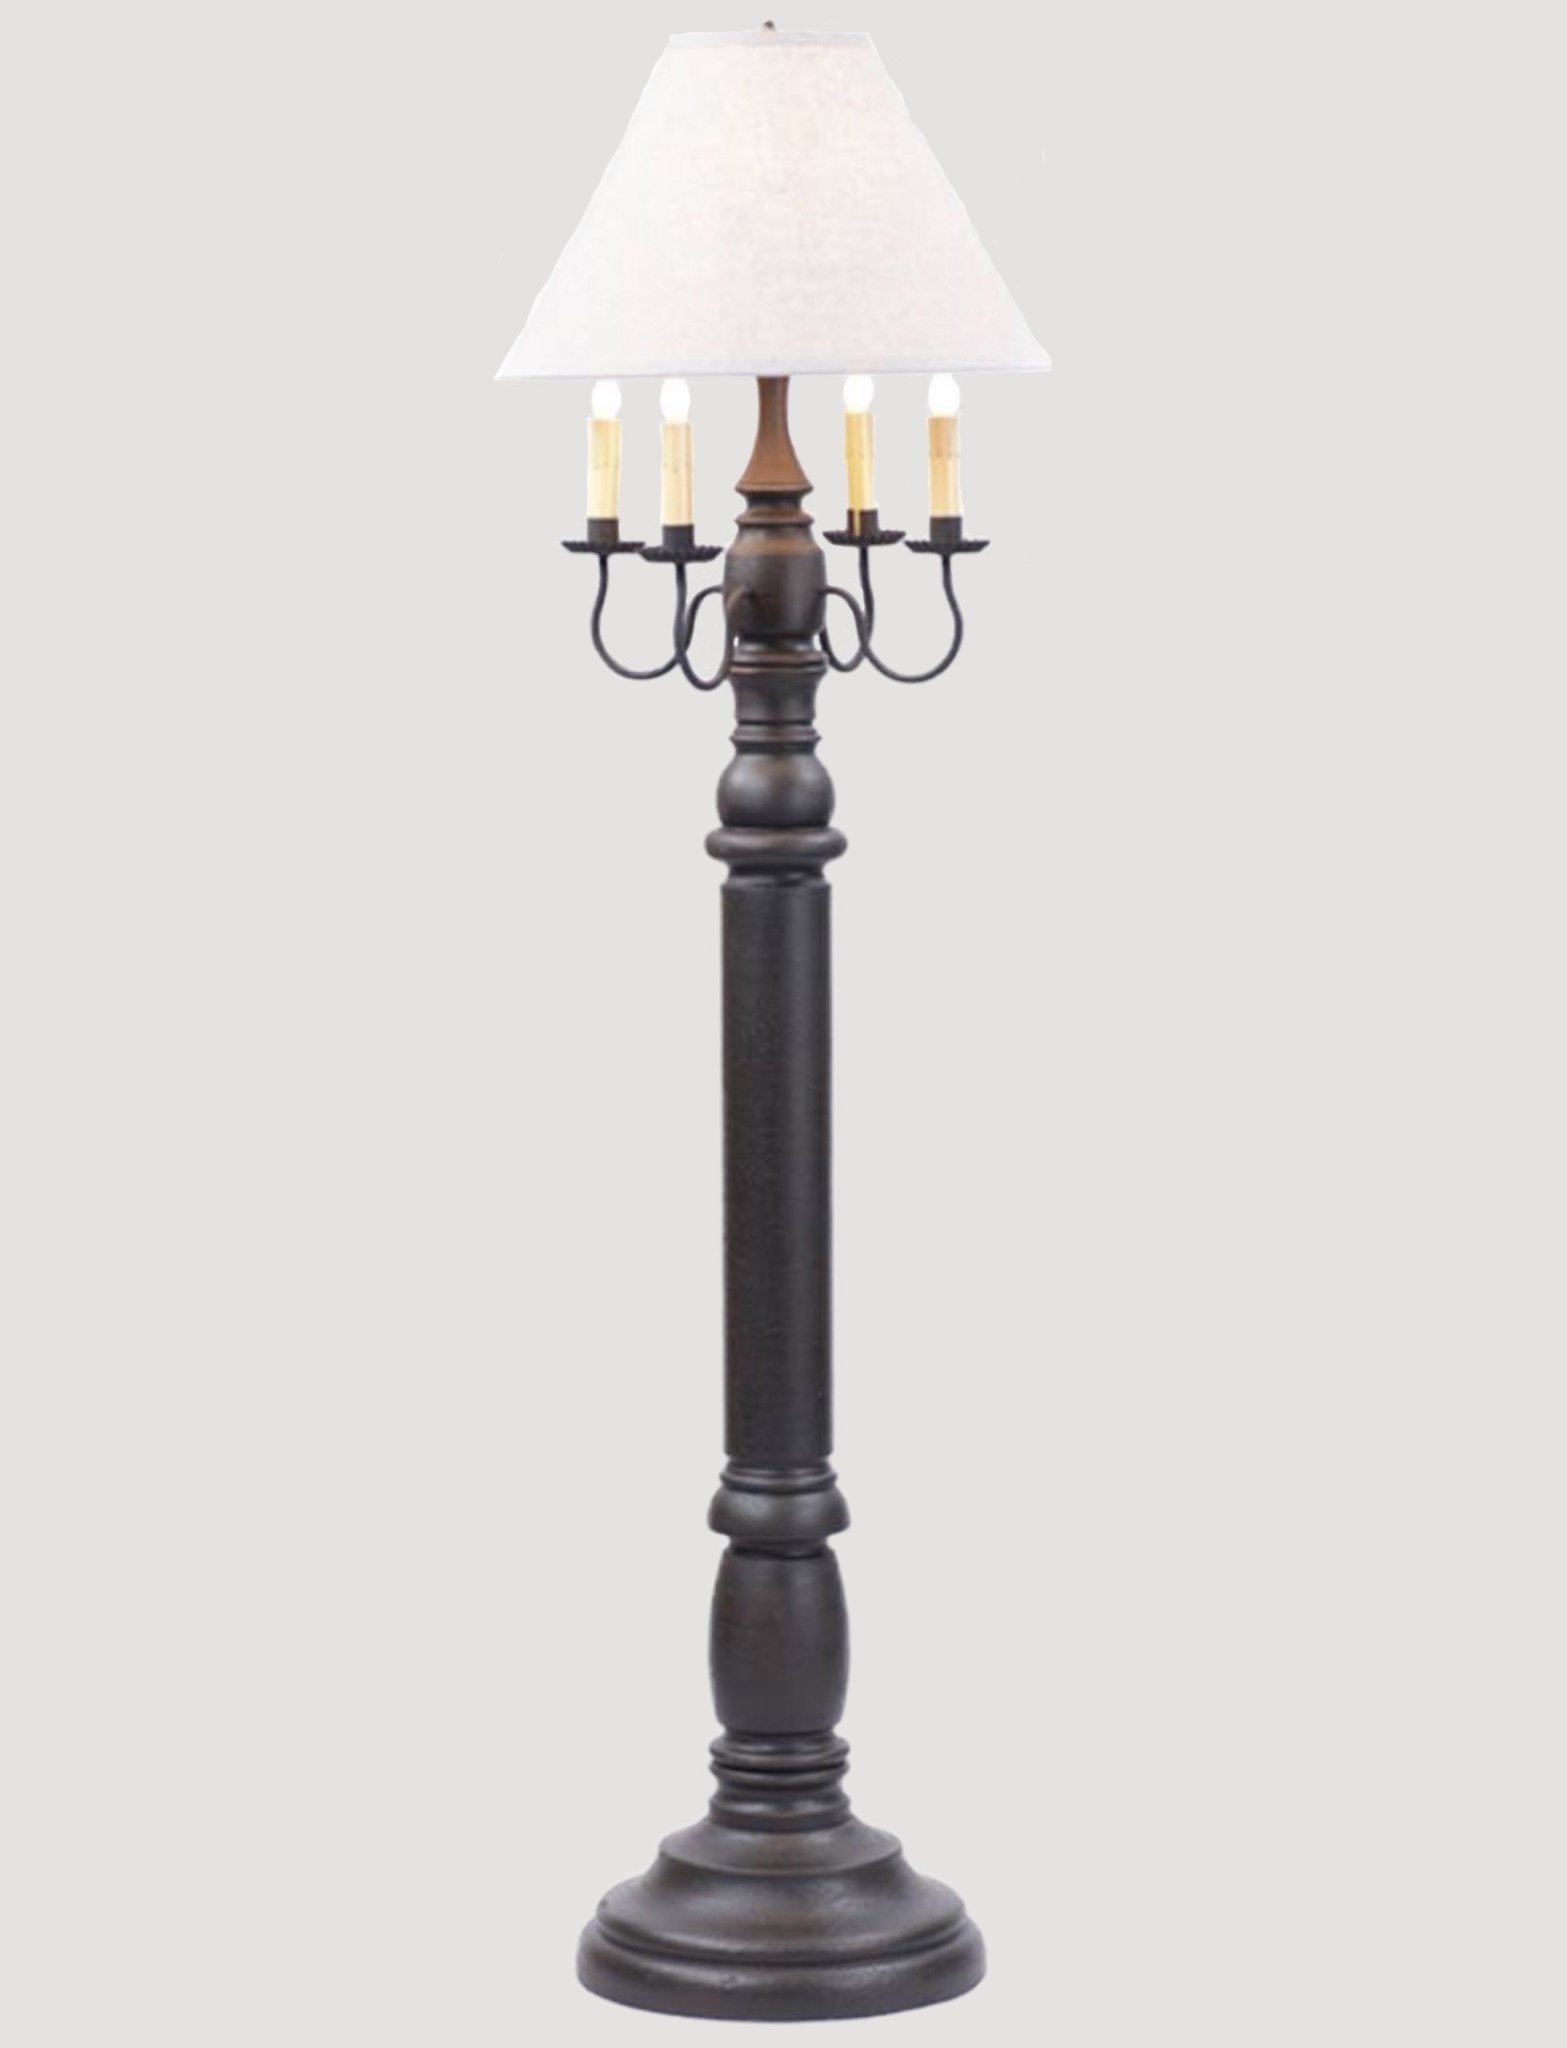 Irvin's Tinware General James Floor Lamp with Ivory Linen Shade Brand: Irvin's Tinware